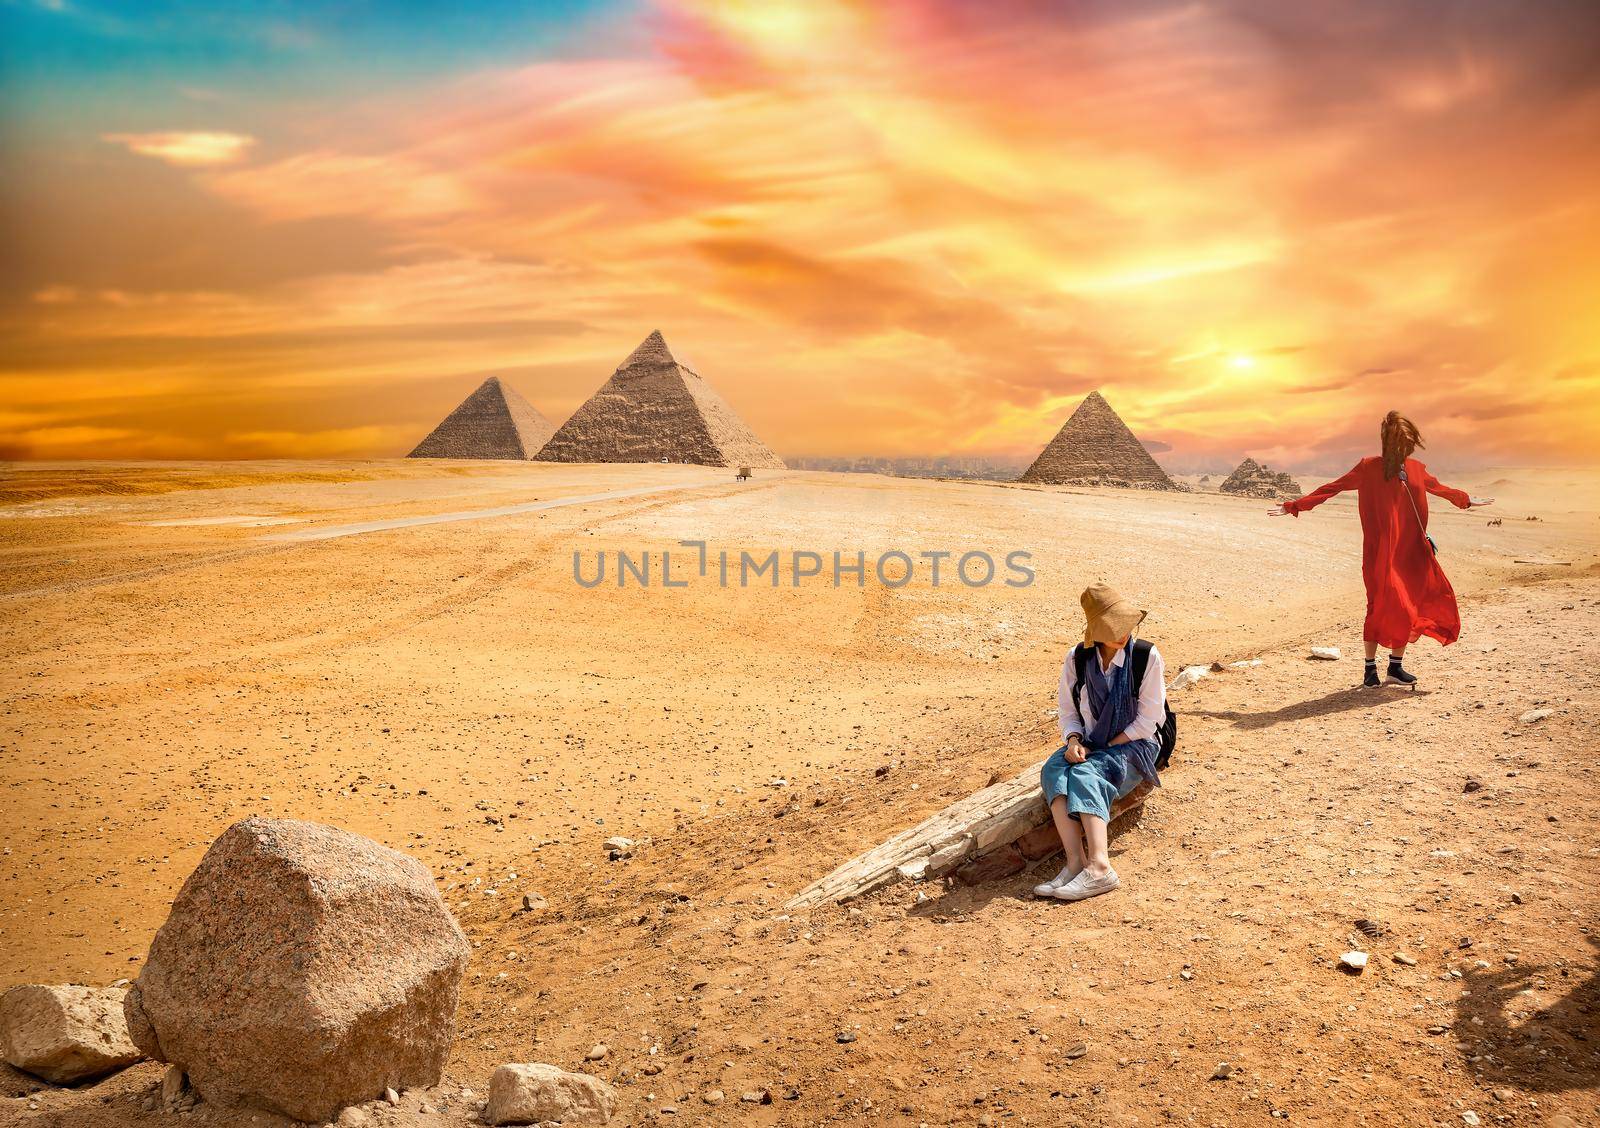 Tour near the egyptian pyramids at colorful sunset